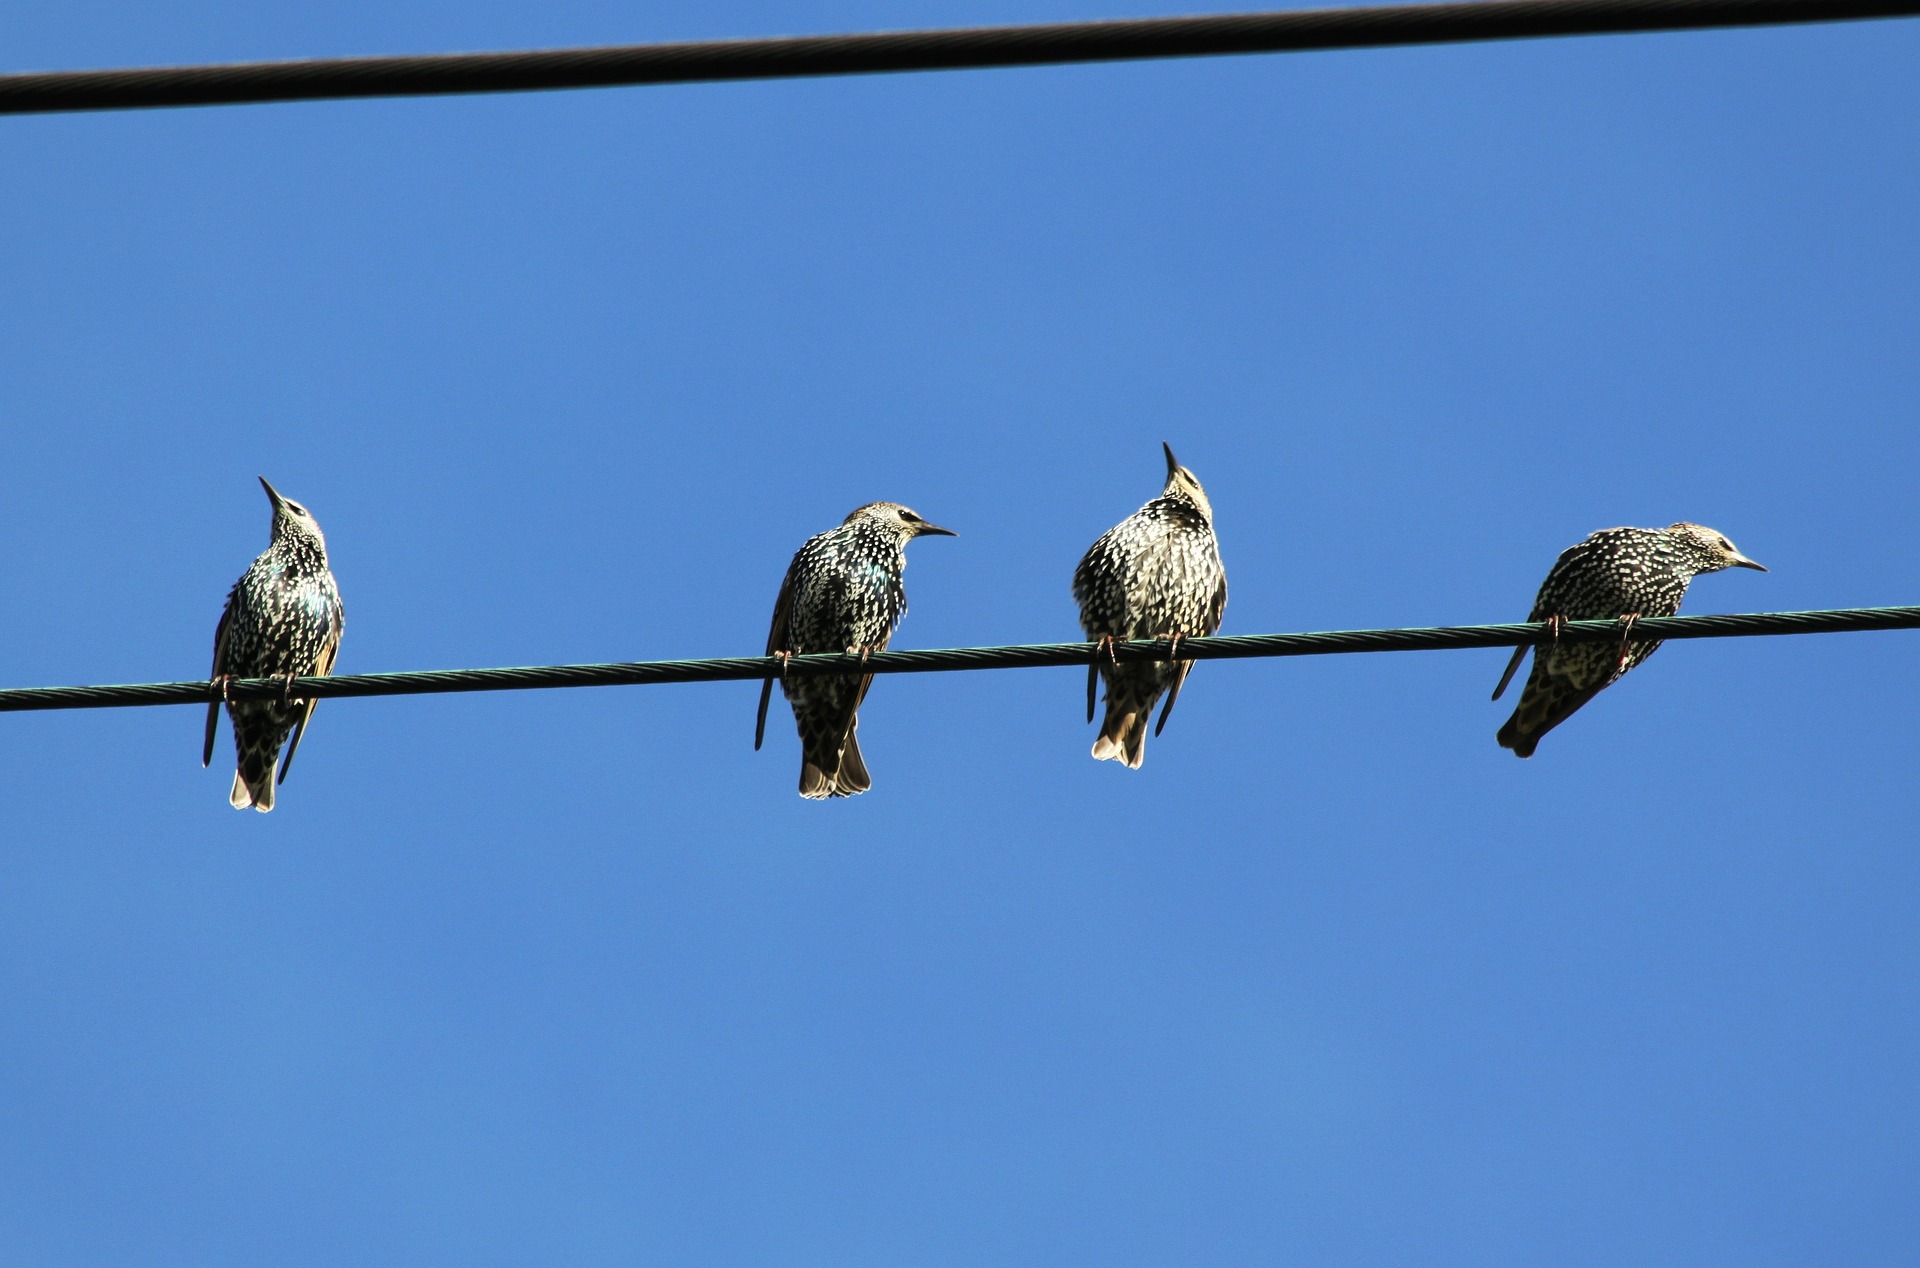 Four birds on a wire.